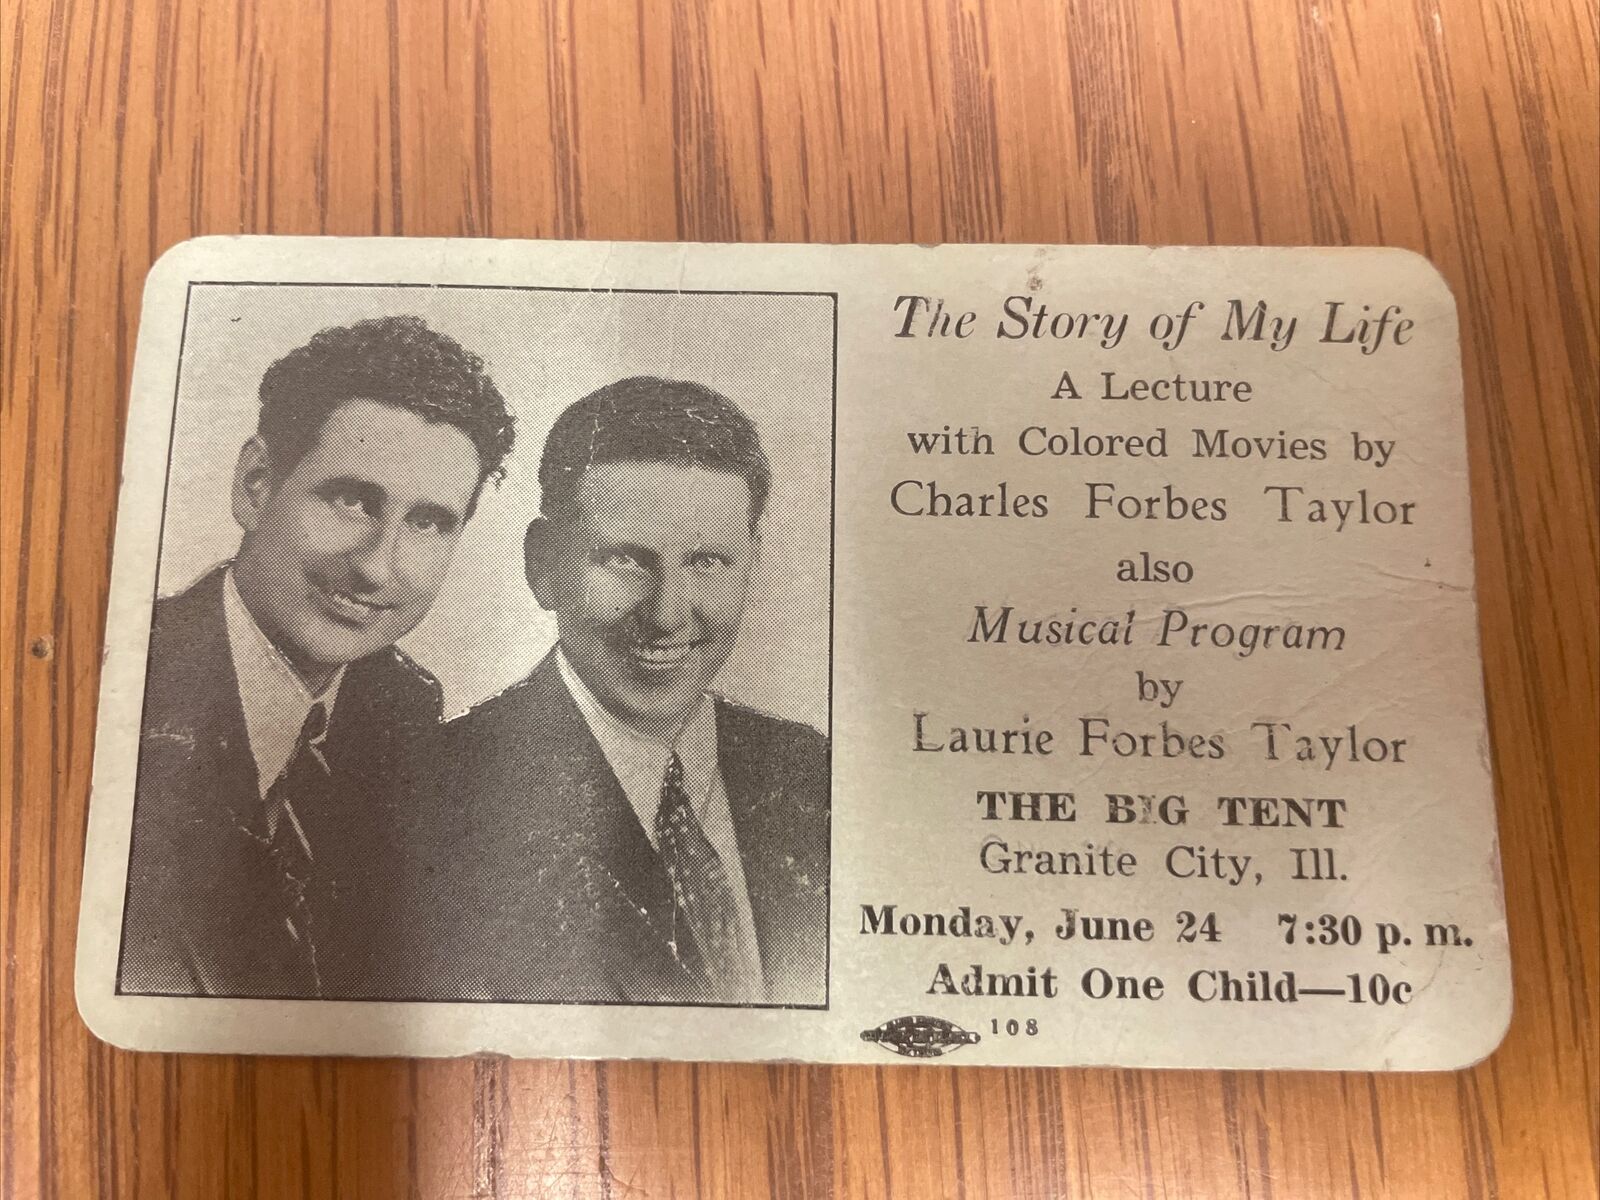 Card - Charles Forbes Taylor - Laurie Forbes Taylor - Presbyterian Evangelist